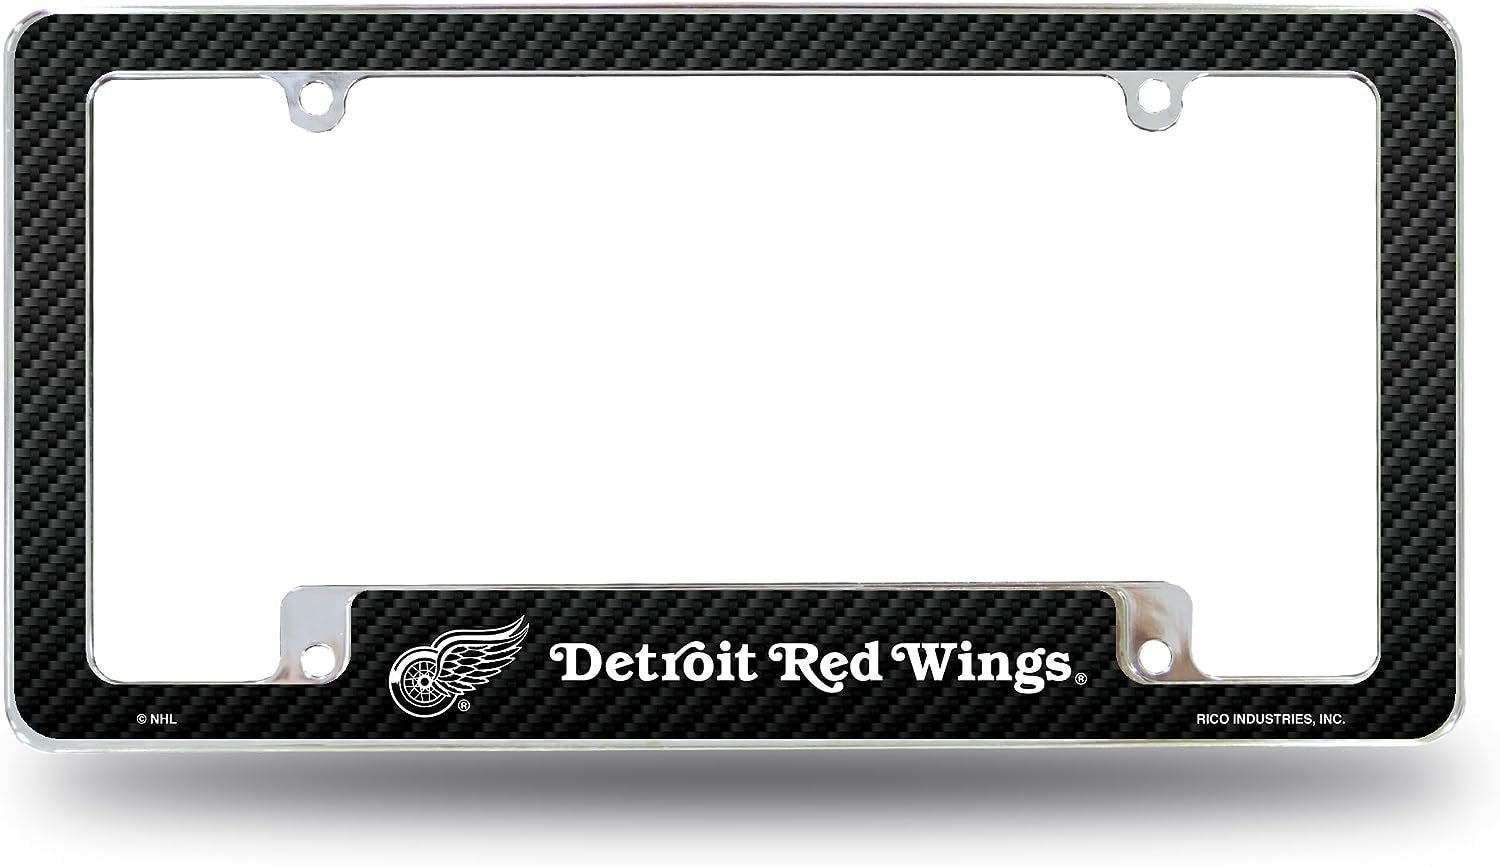 Detroit Red Wings Metal License Plate Frame Chrome Tag Cover Carbon Fiber Design 6x12 Inch